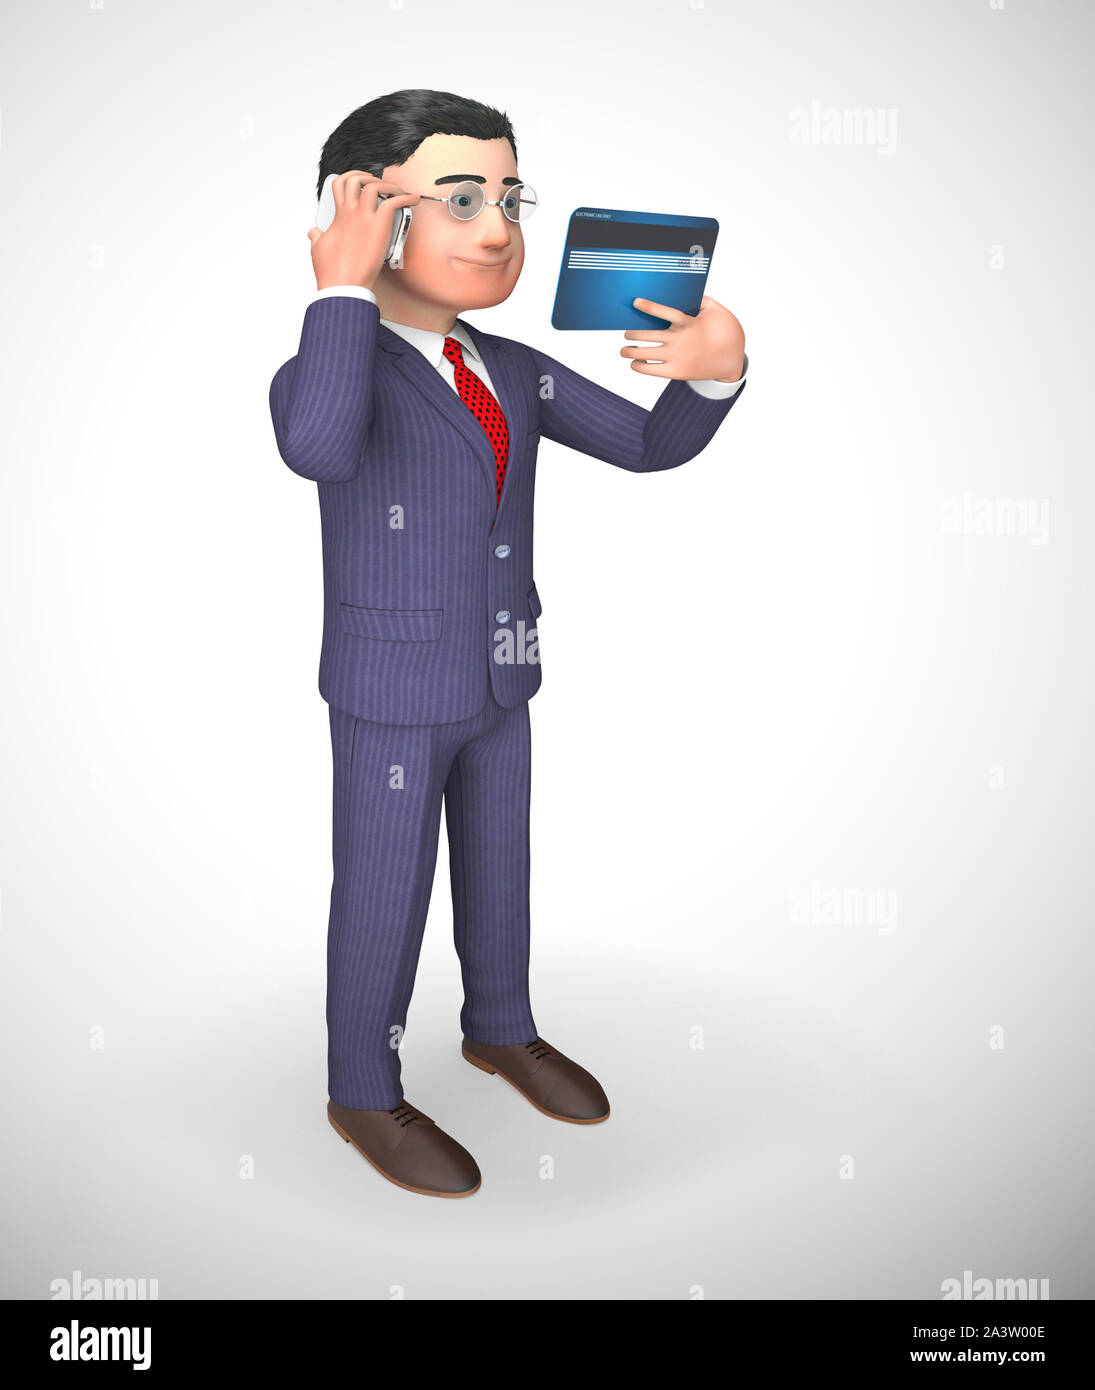 Business credit card payments icon shows trade finance. Using plastic for purchases and expenses - 3d illustration Stock Photo